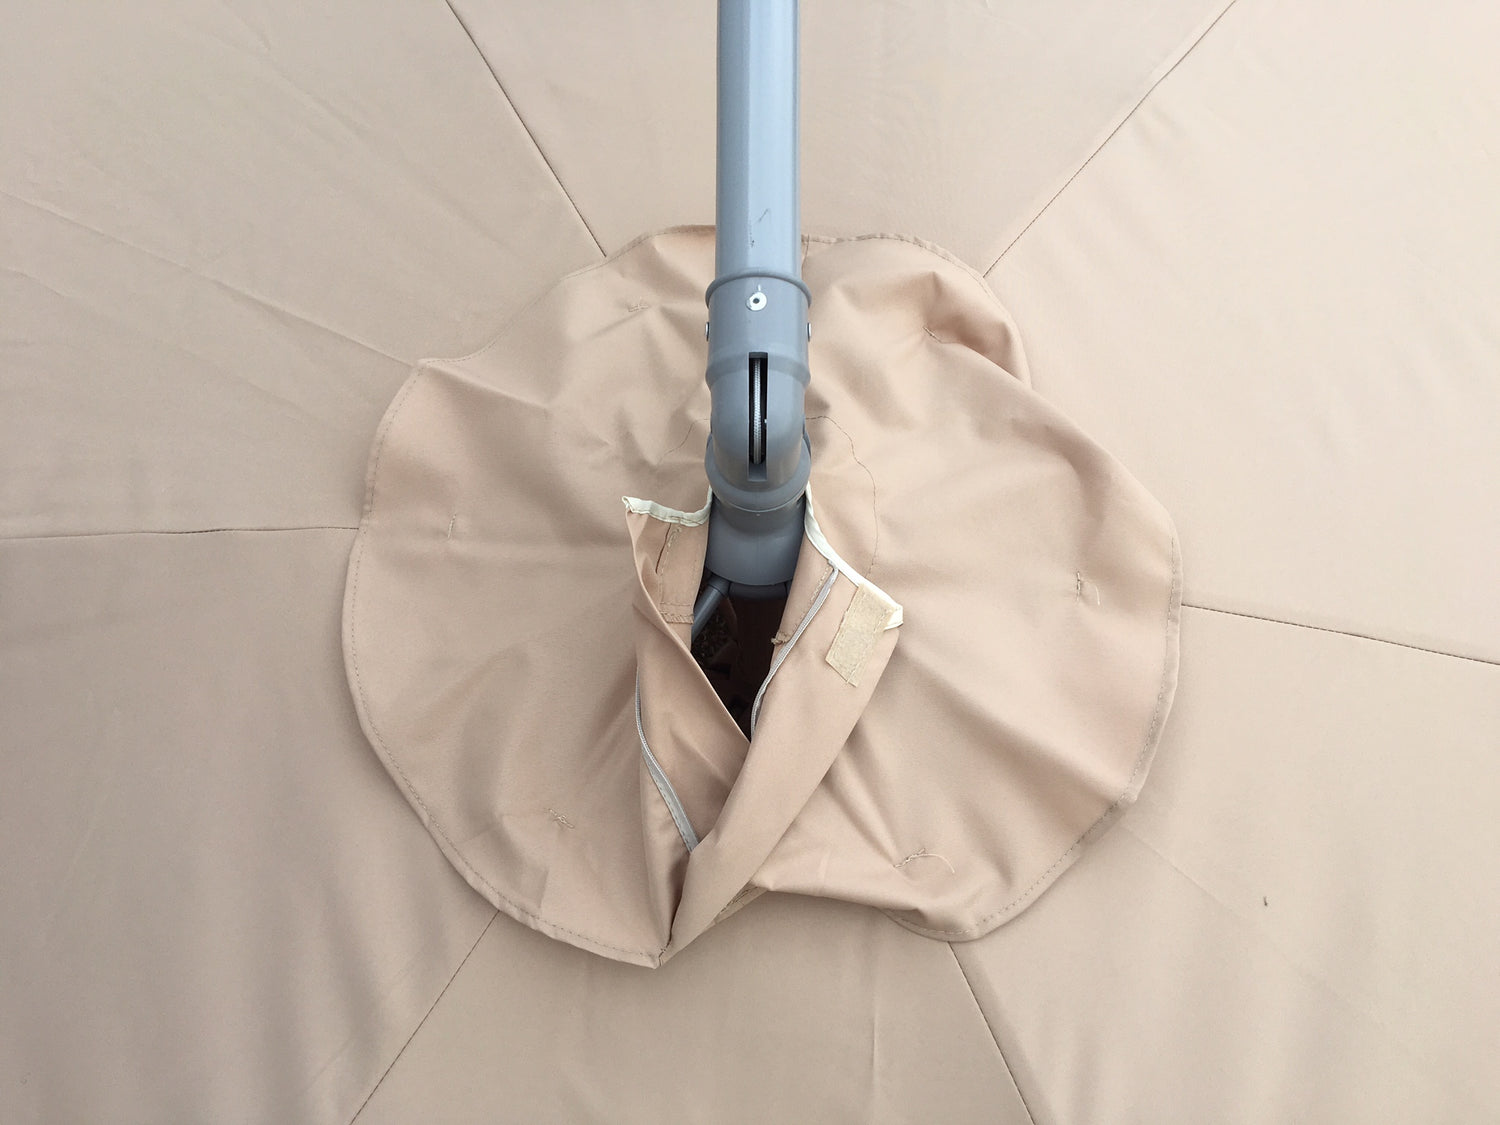 Ikea Karlso Parasol Replacement Canopy 990.484.37 Top opening 2